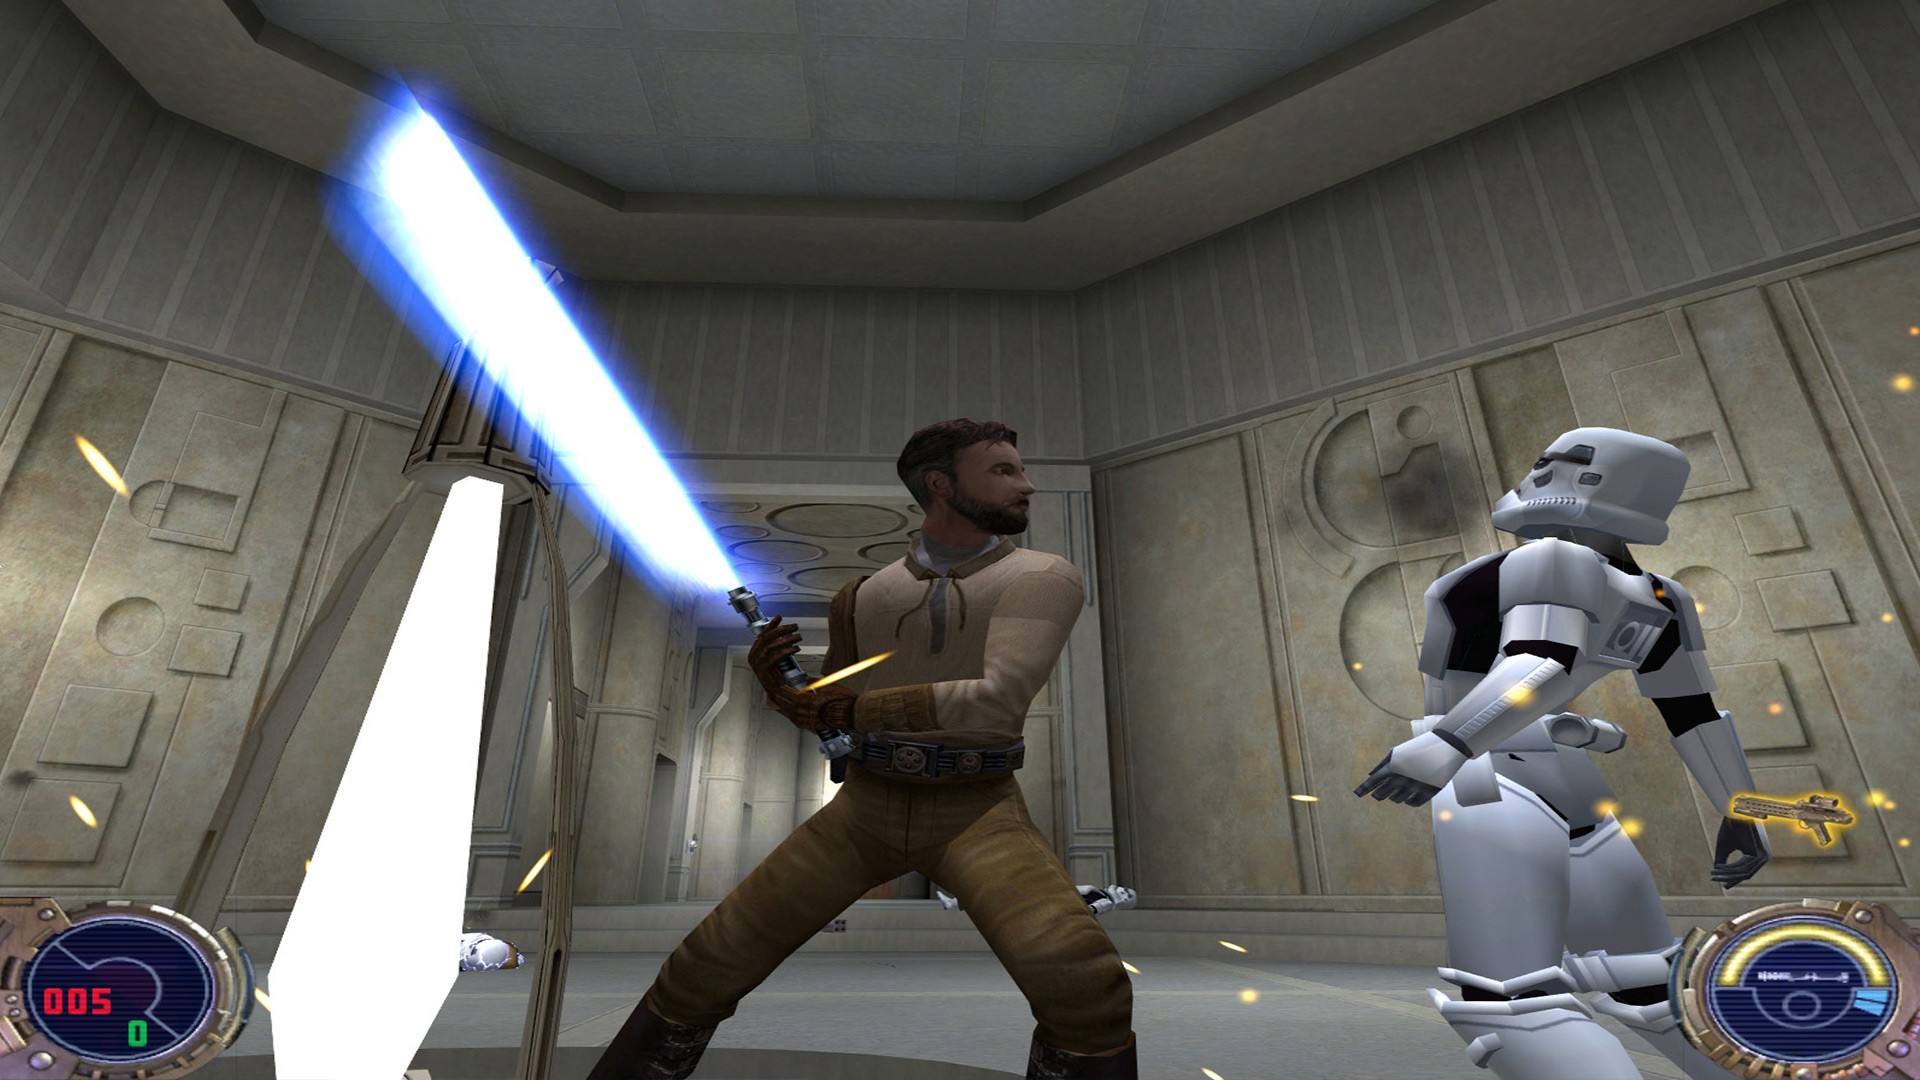 Action, Aspyr Media, Classic, disney interactive, LucasArts, Lucasfilm, multiplayer, PS4, PS4 Review, Rating 7/10, Raven Software, Sci-Fi, Star Wars, Star Wars Jedi Knight II: Jedi Outcast, Star Wars Jedi Knight II: Jedi Outcast Review